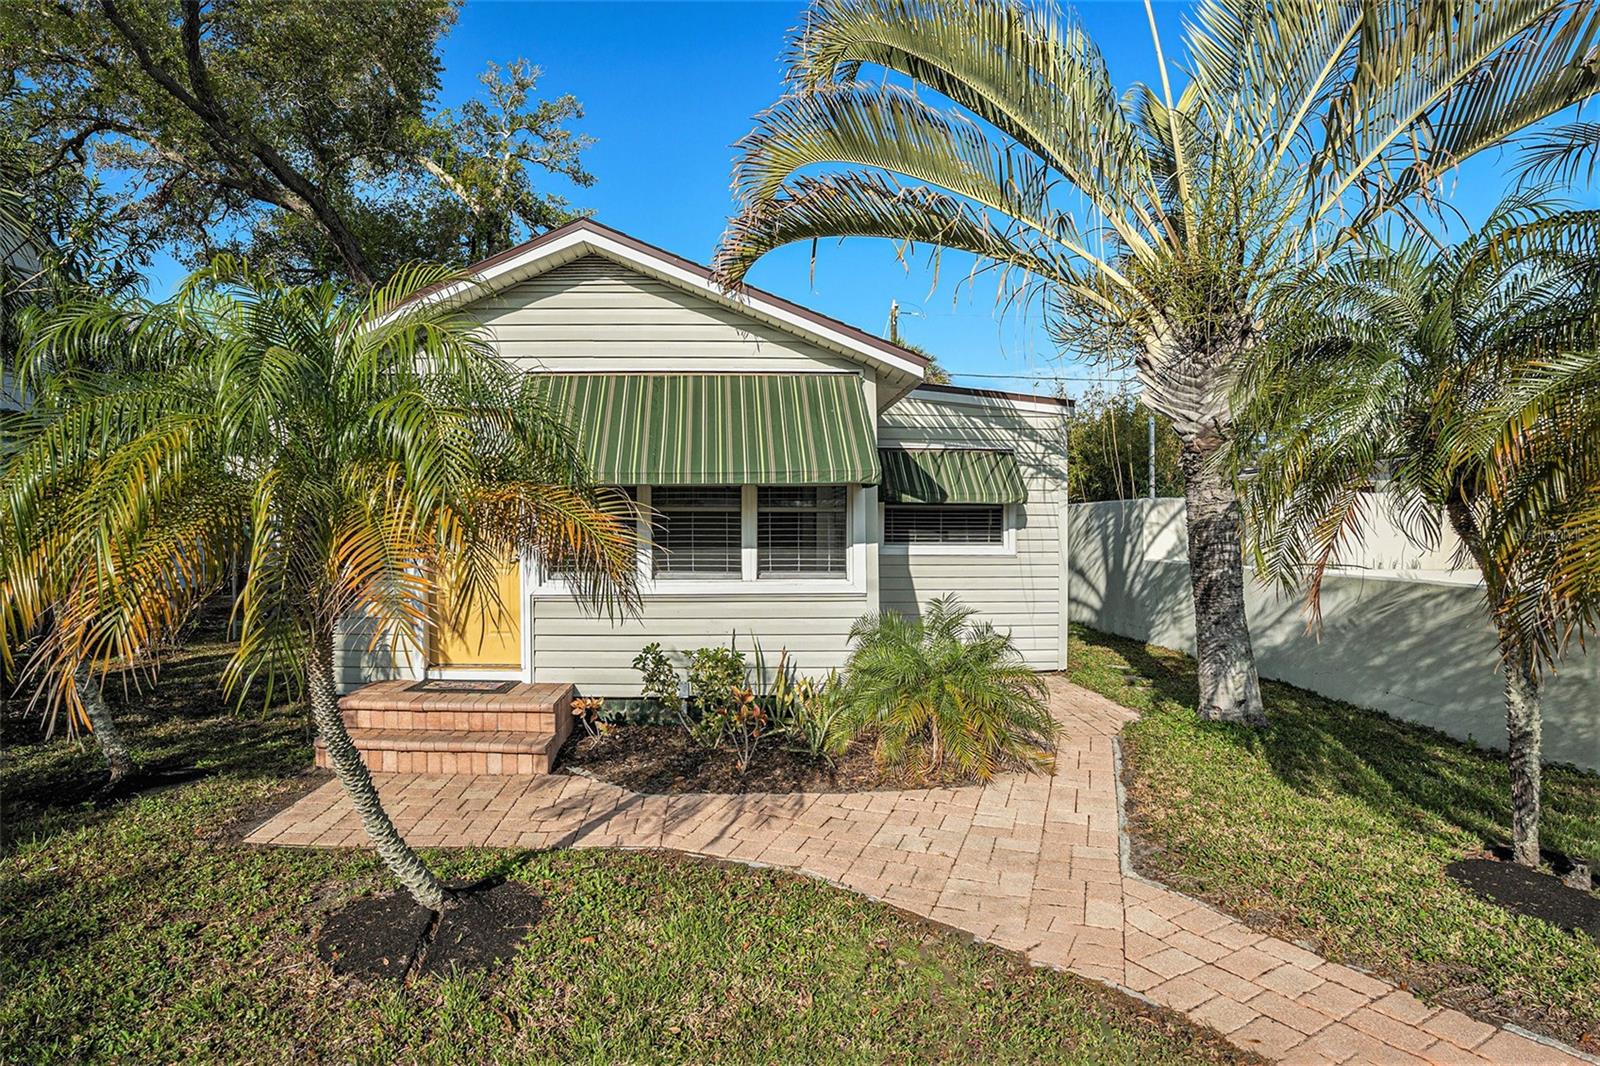 This beautiful coastal dream cottage awaits it's next owner! Could it be you? Charming pavers lead you to your private tucked away cottage just minutes from Gulfport Beach!